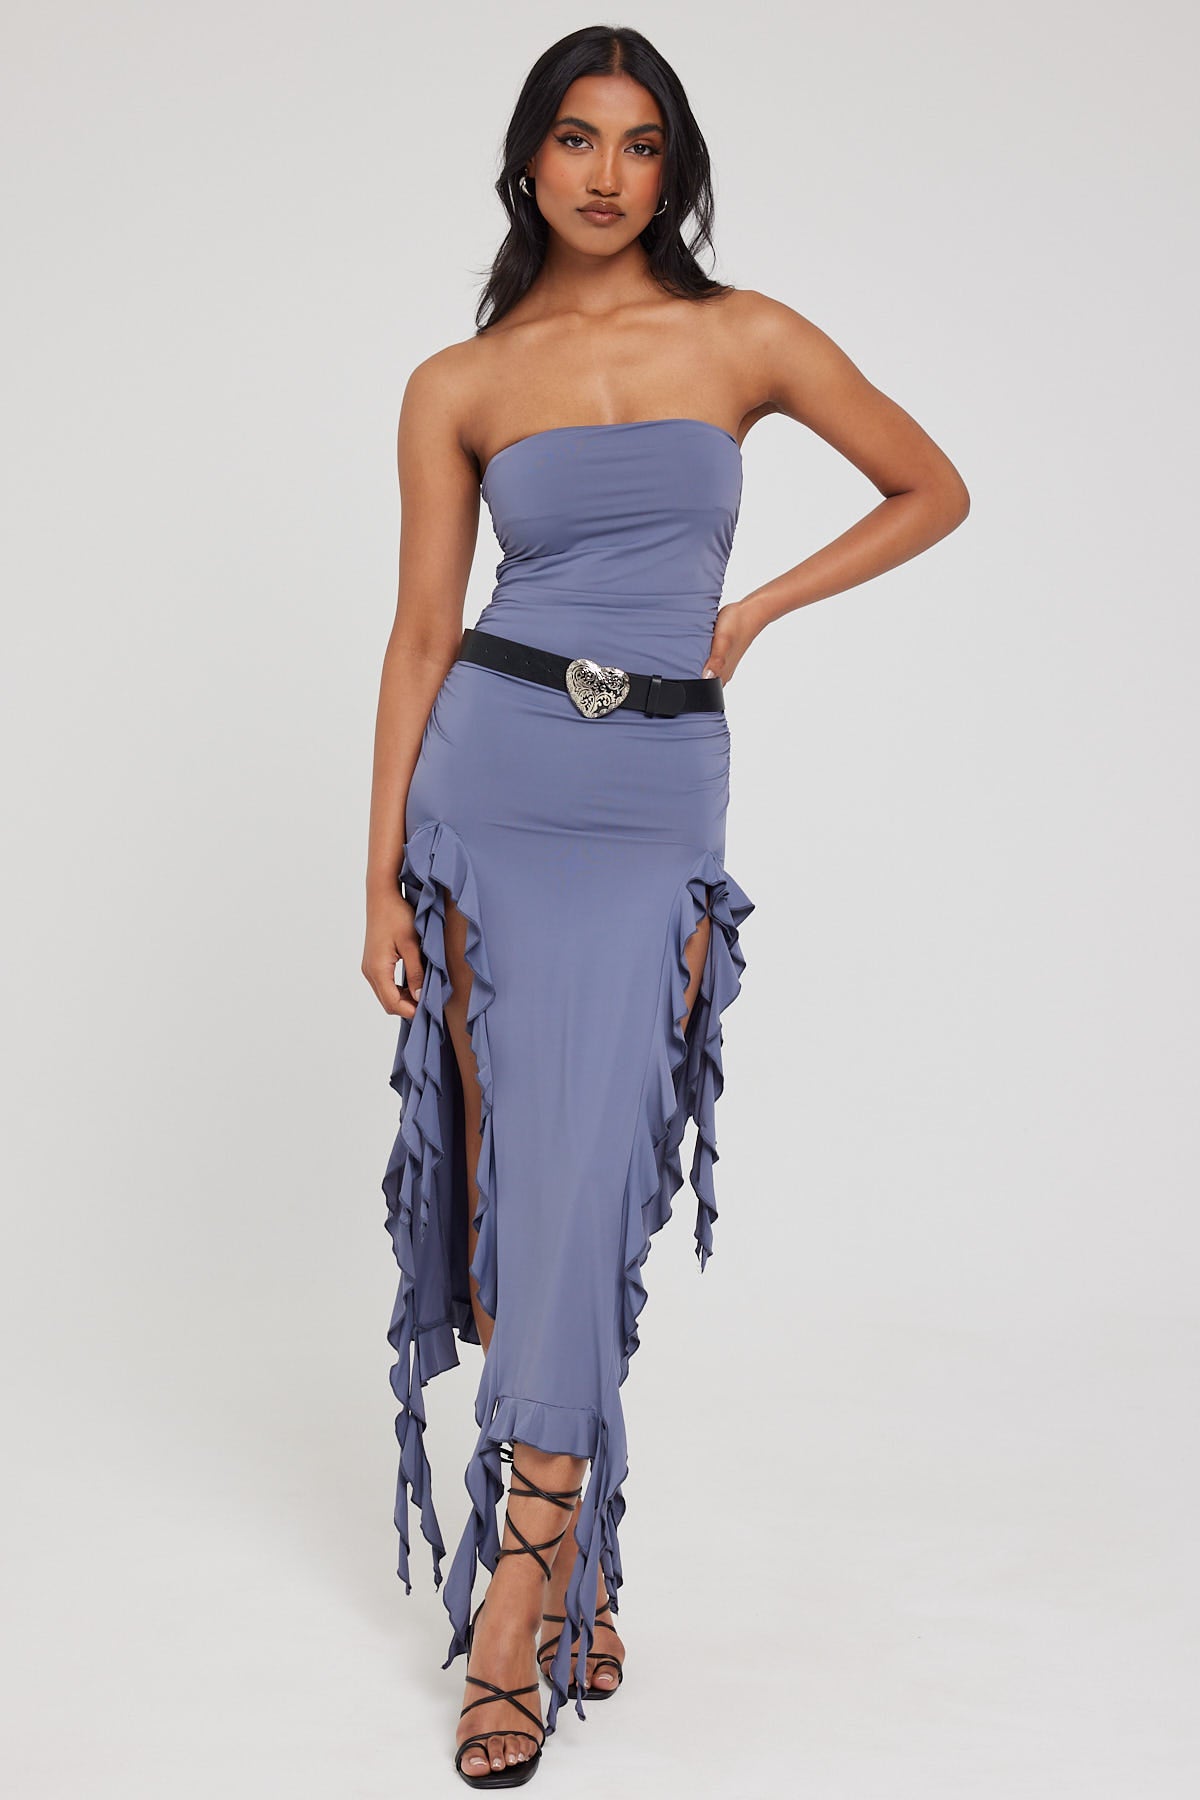 Lioness Rendezvous Strapless Dress Slate